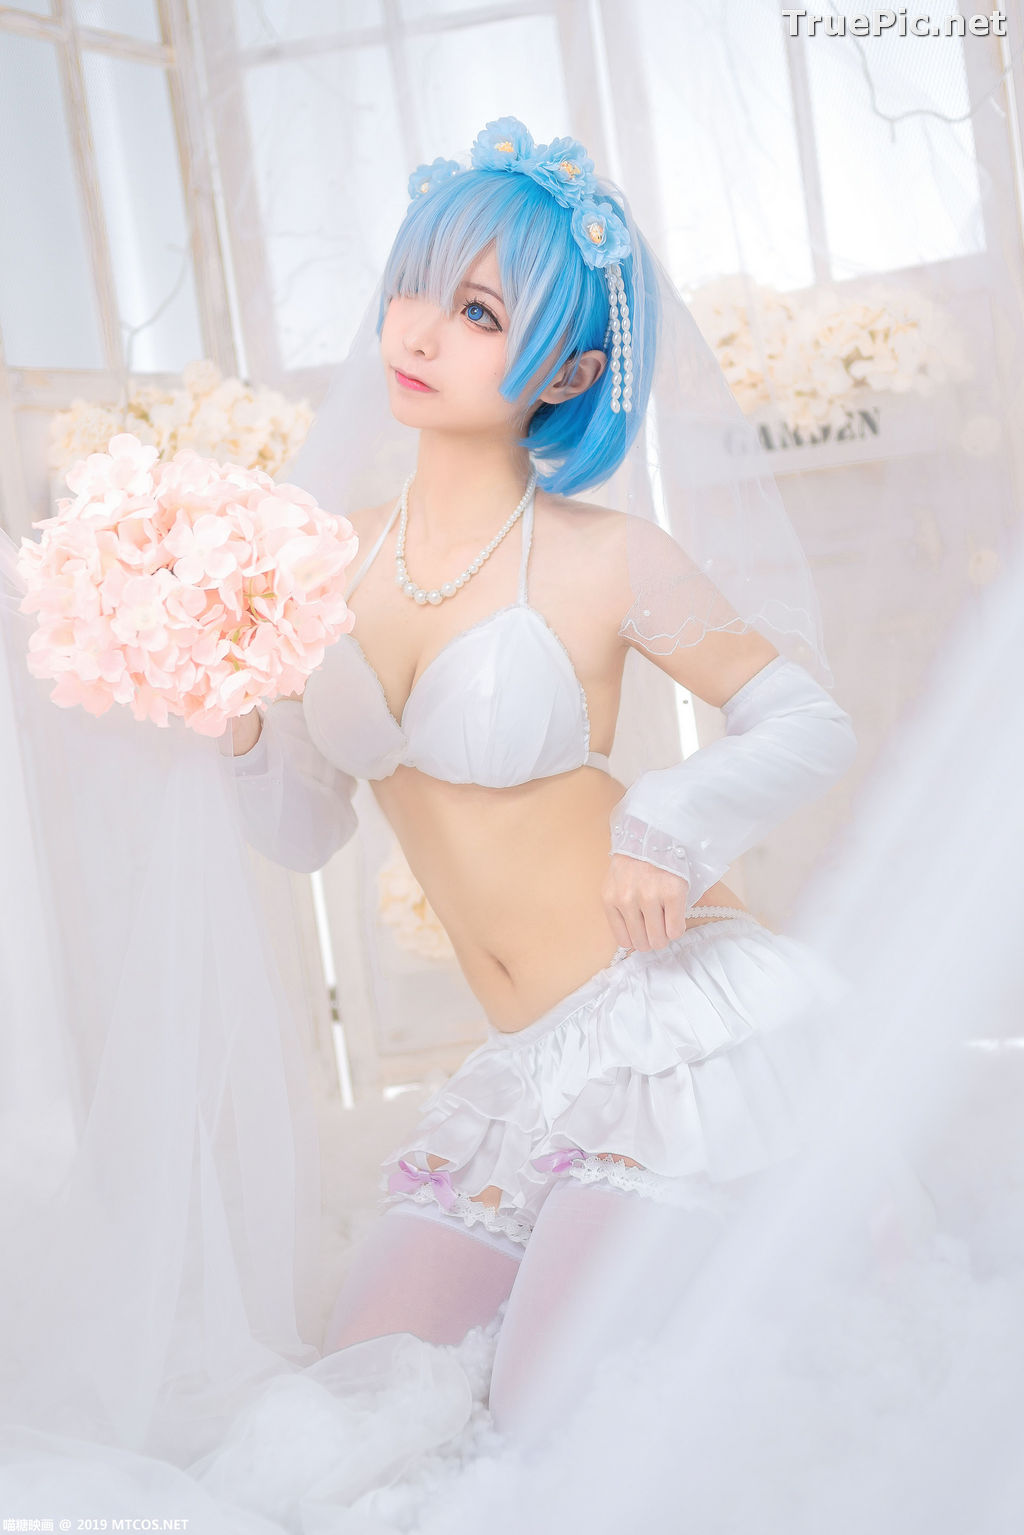 Image [MTCos] 喵糖映画 Vol.029 – Chinese Cute Model – Bride Rem Cosplay - TruePic.net - Picture-19